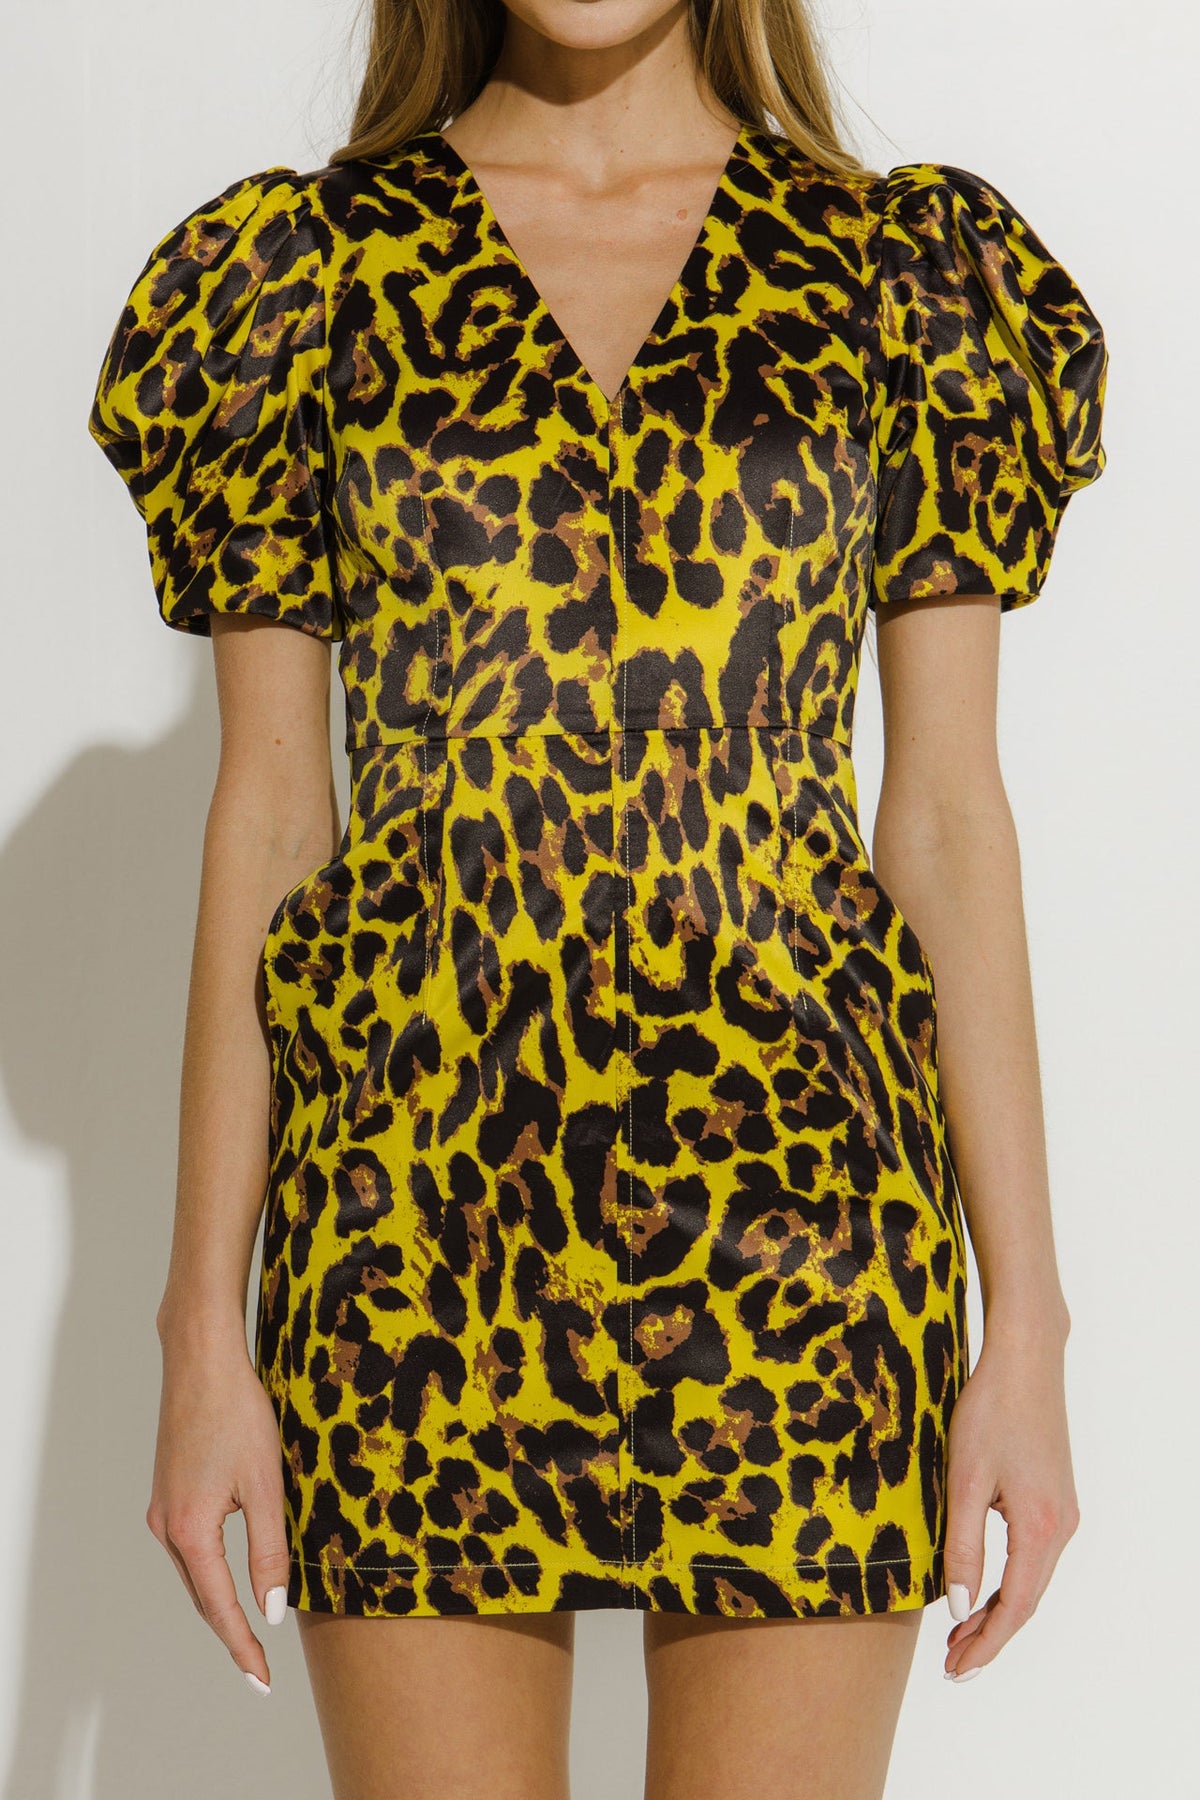 ENDLESS ROSE - Leopard Print Mini Dress - DRESSES available at Objectrare